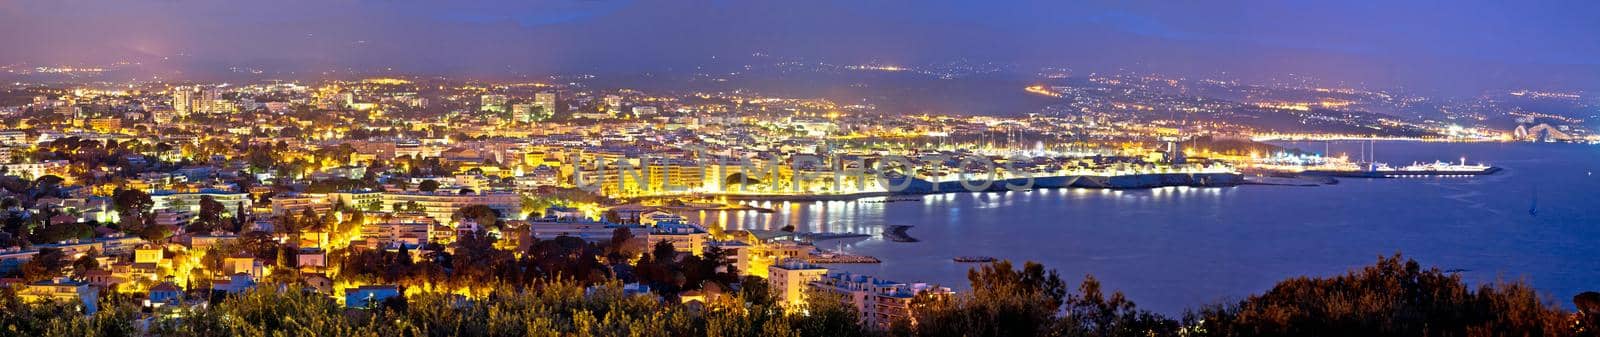 French riviera. Historic town of Antibes coastline panoramic evening view by xbrchx